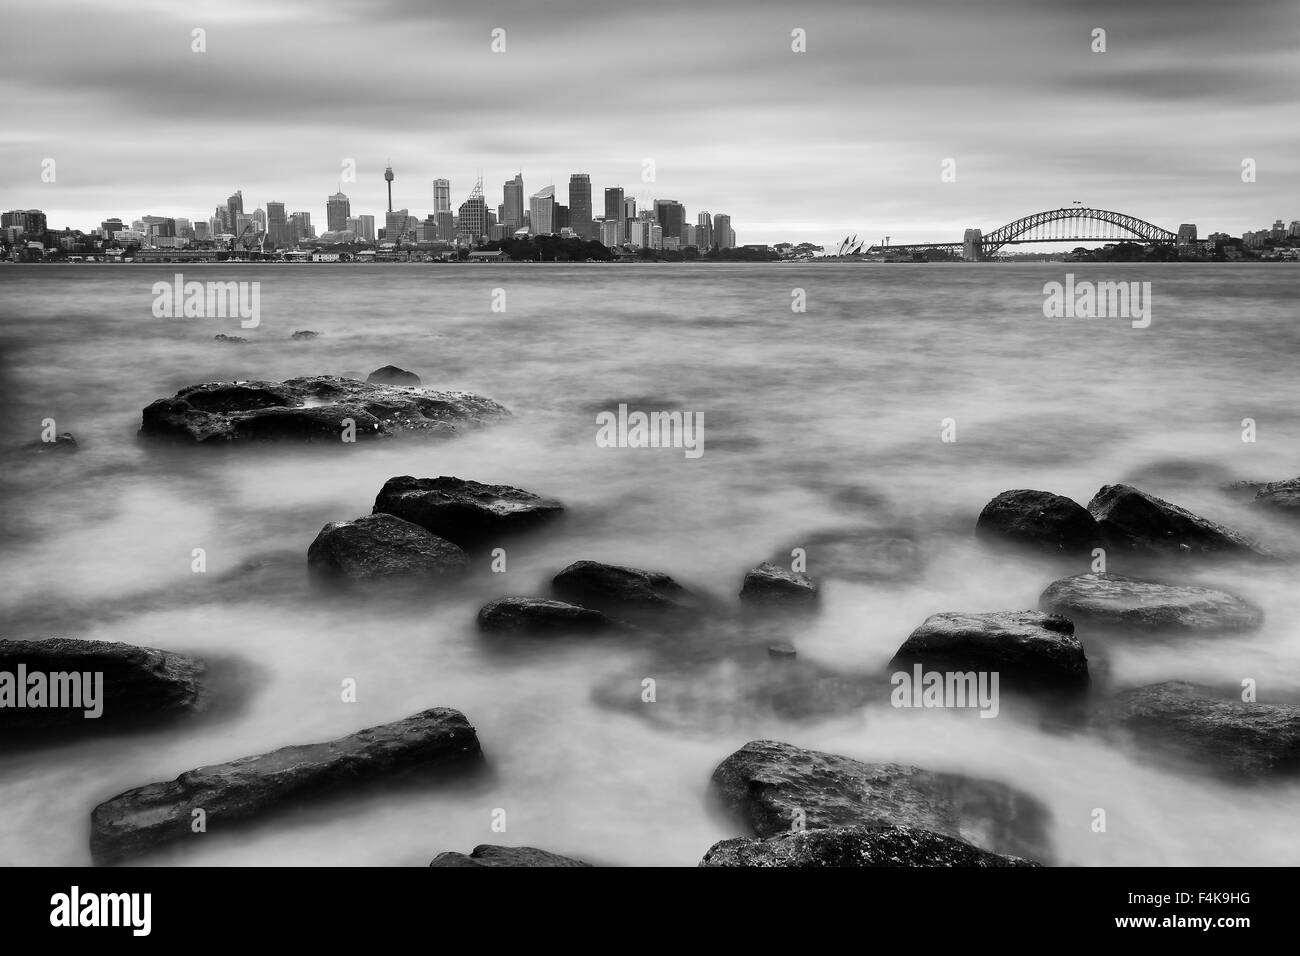 Distant Sydney city CBD landmarks with Harbour Bridge across blurred harbour waters at sunset with beach rocks in foreground Stock Photo